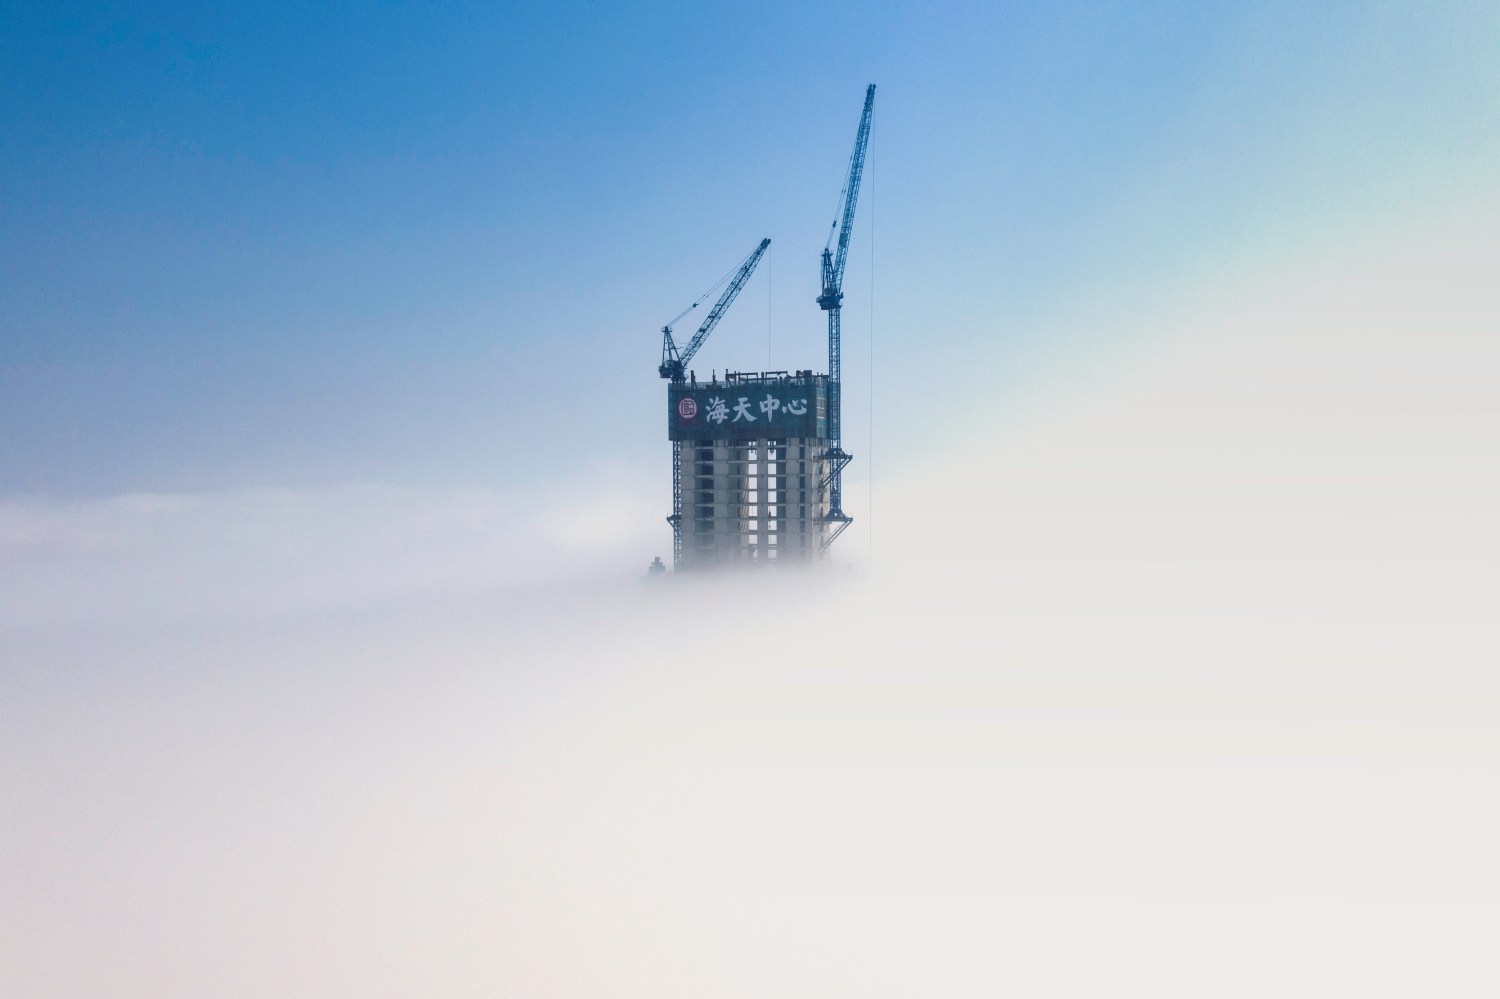 The skyscraper Haitian Center Tower under construction is seen amid cloud in Qingdao, Shandong province, China June 4, 2019. REUTERS/Stringer  ATTENTION EDITORS - THIS IMAGE WAS PROVIDED BY A THIRD PARTY. CHINA OUT. - RC15B920ABE0